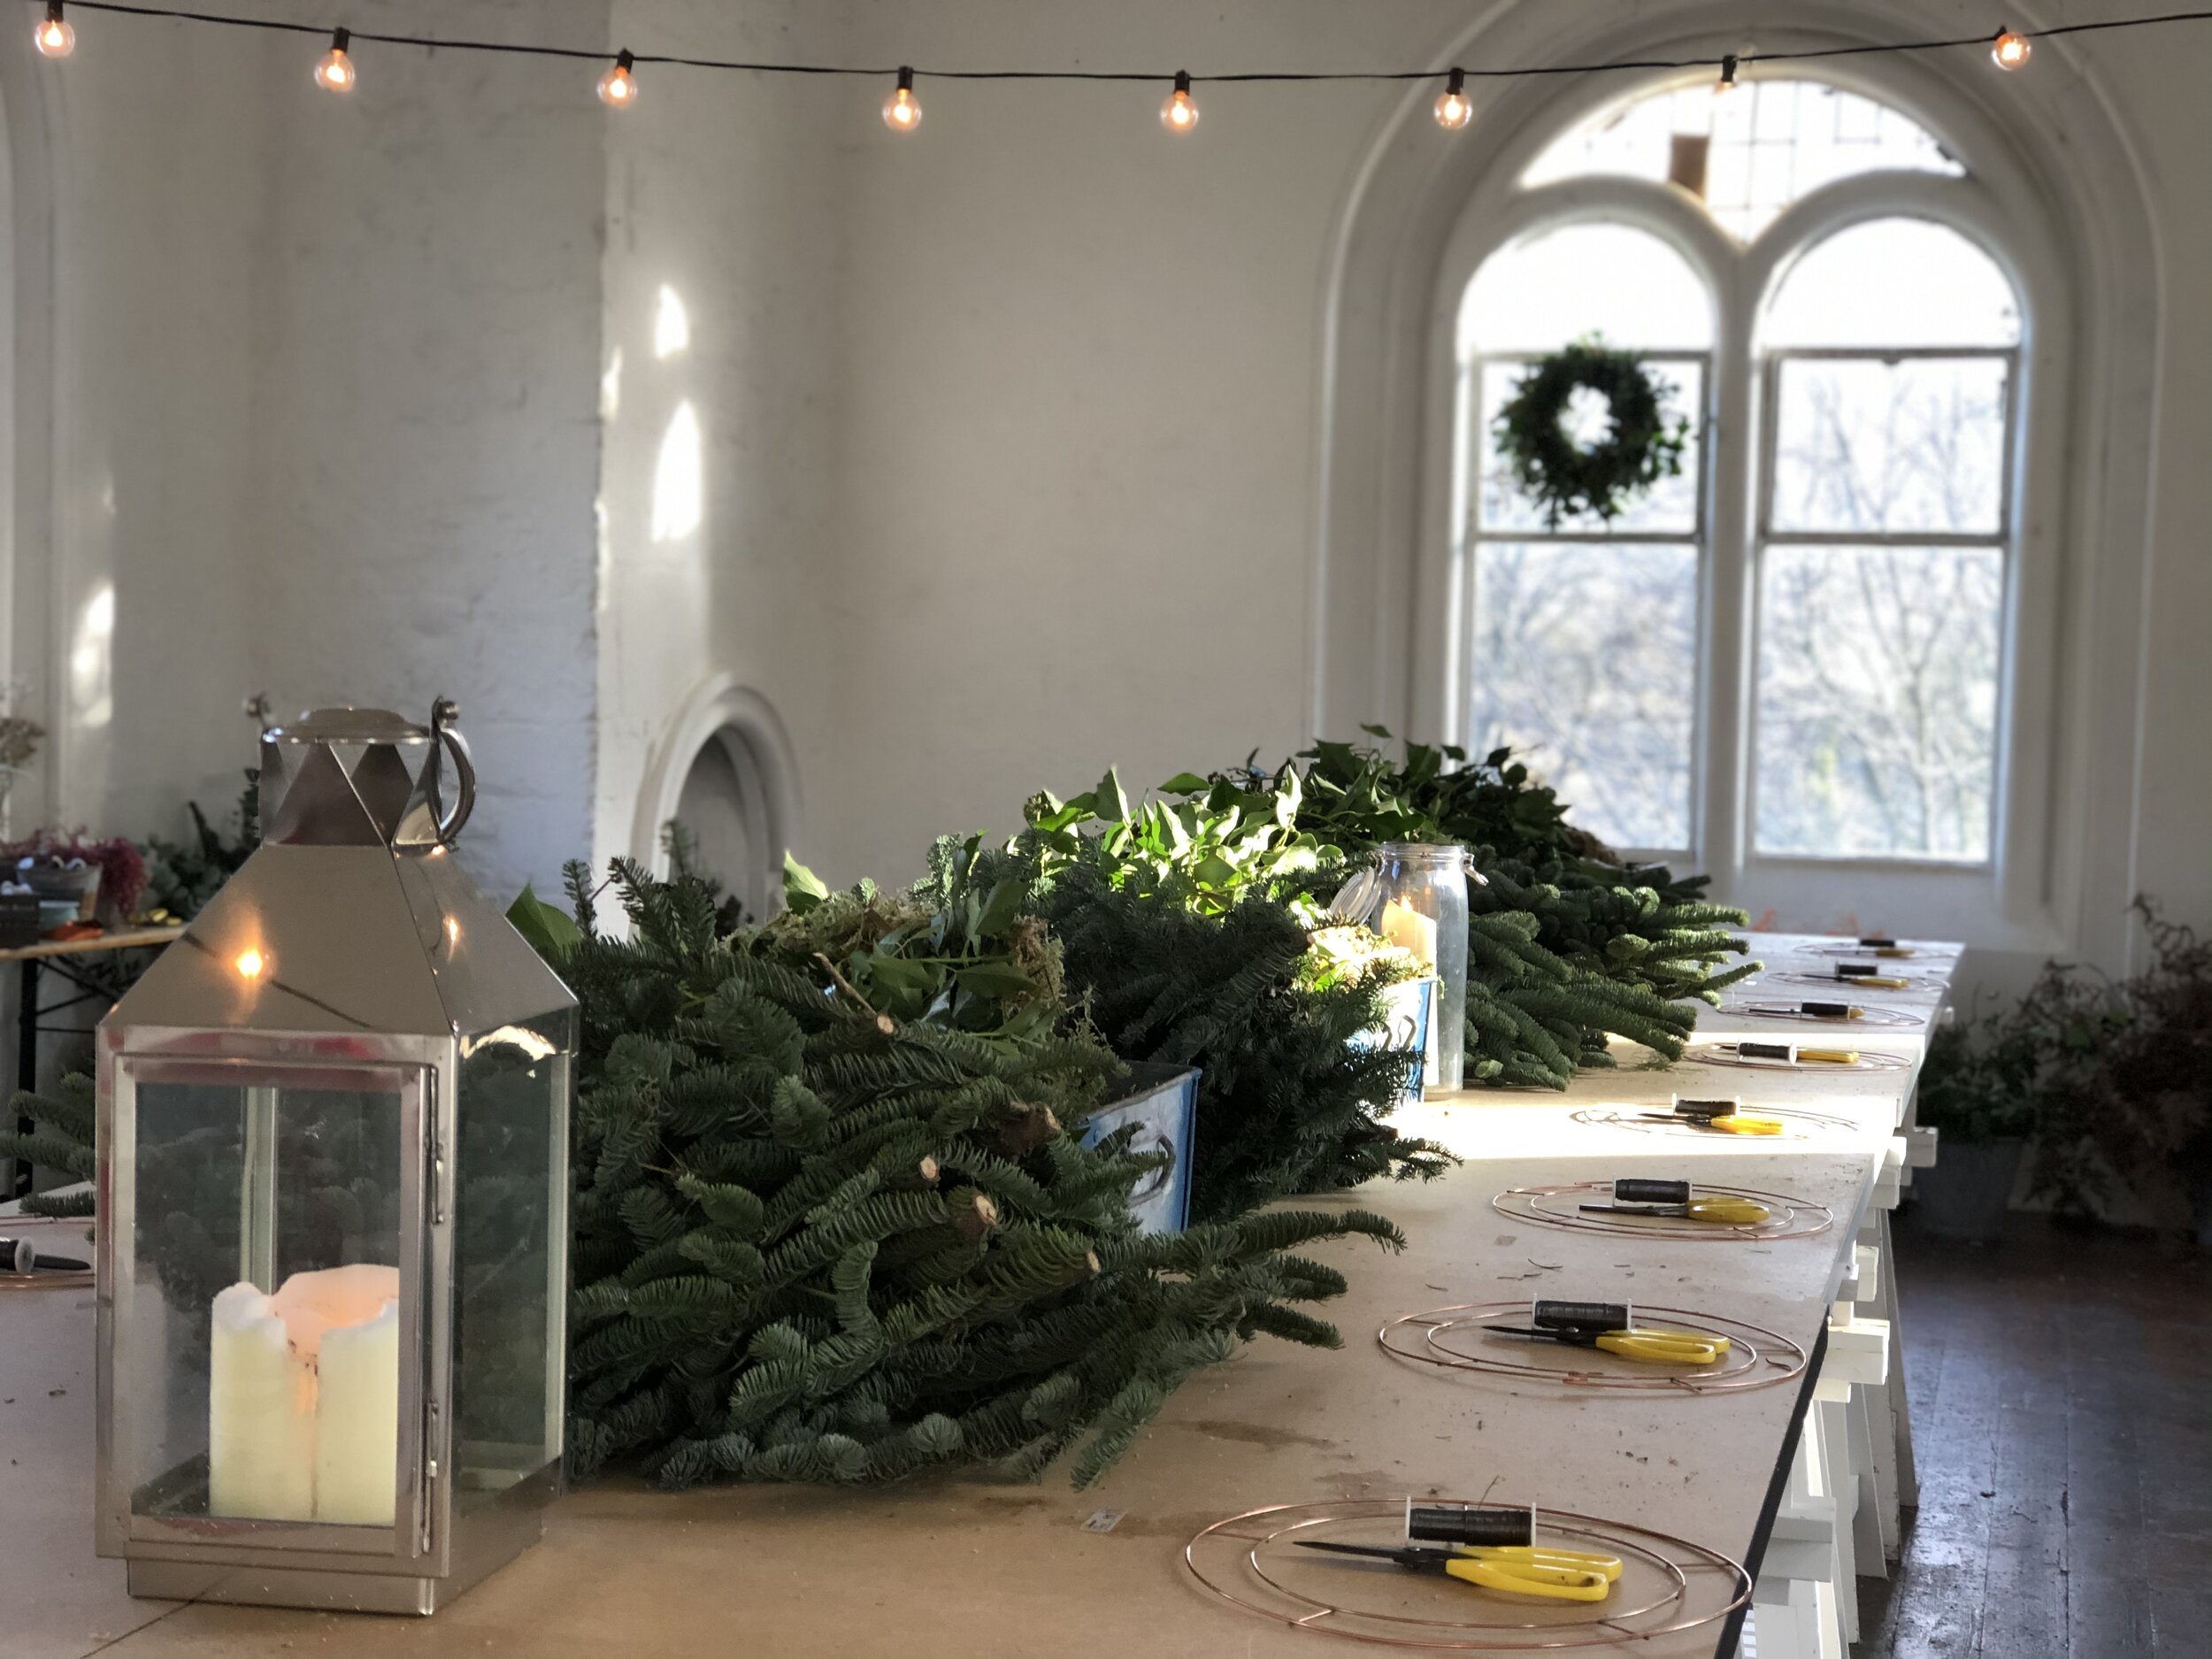 Christmas Wreath Course Setting with Candles and Festoon Lights (Copy)